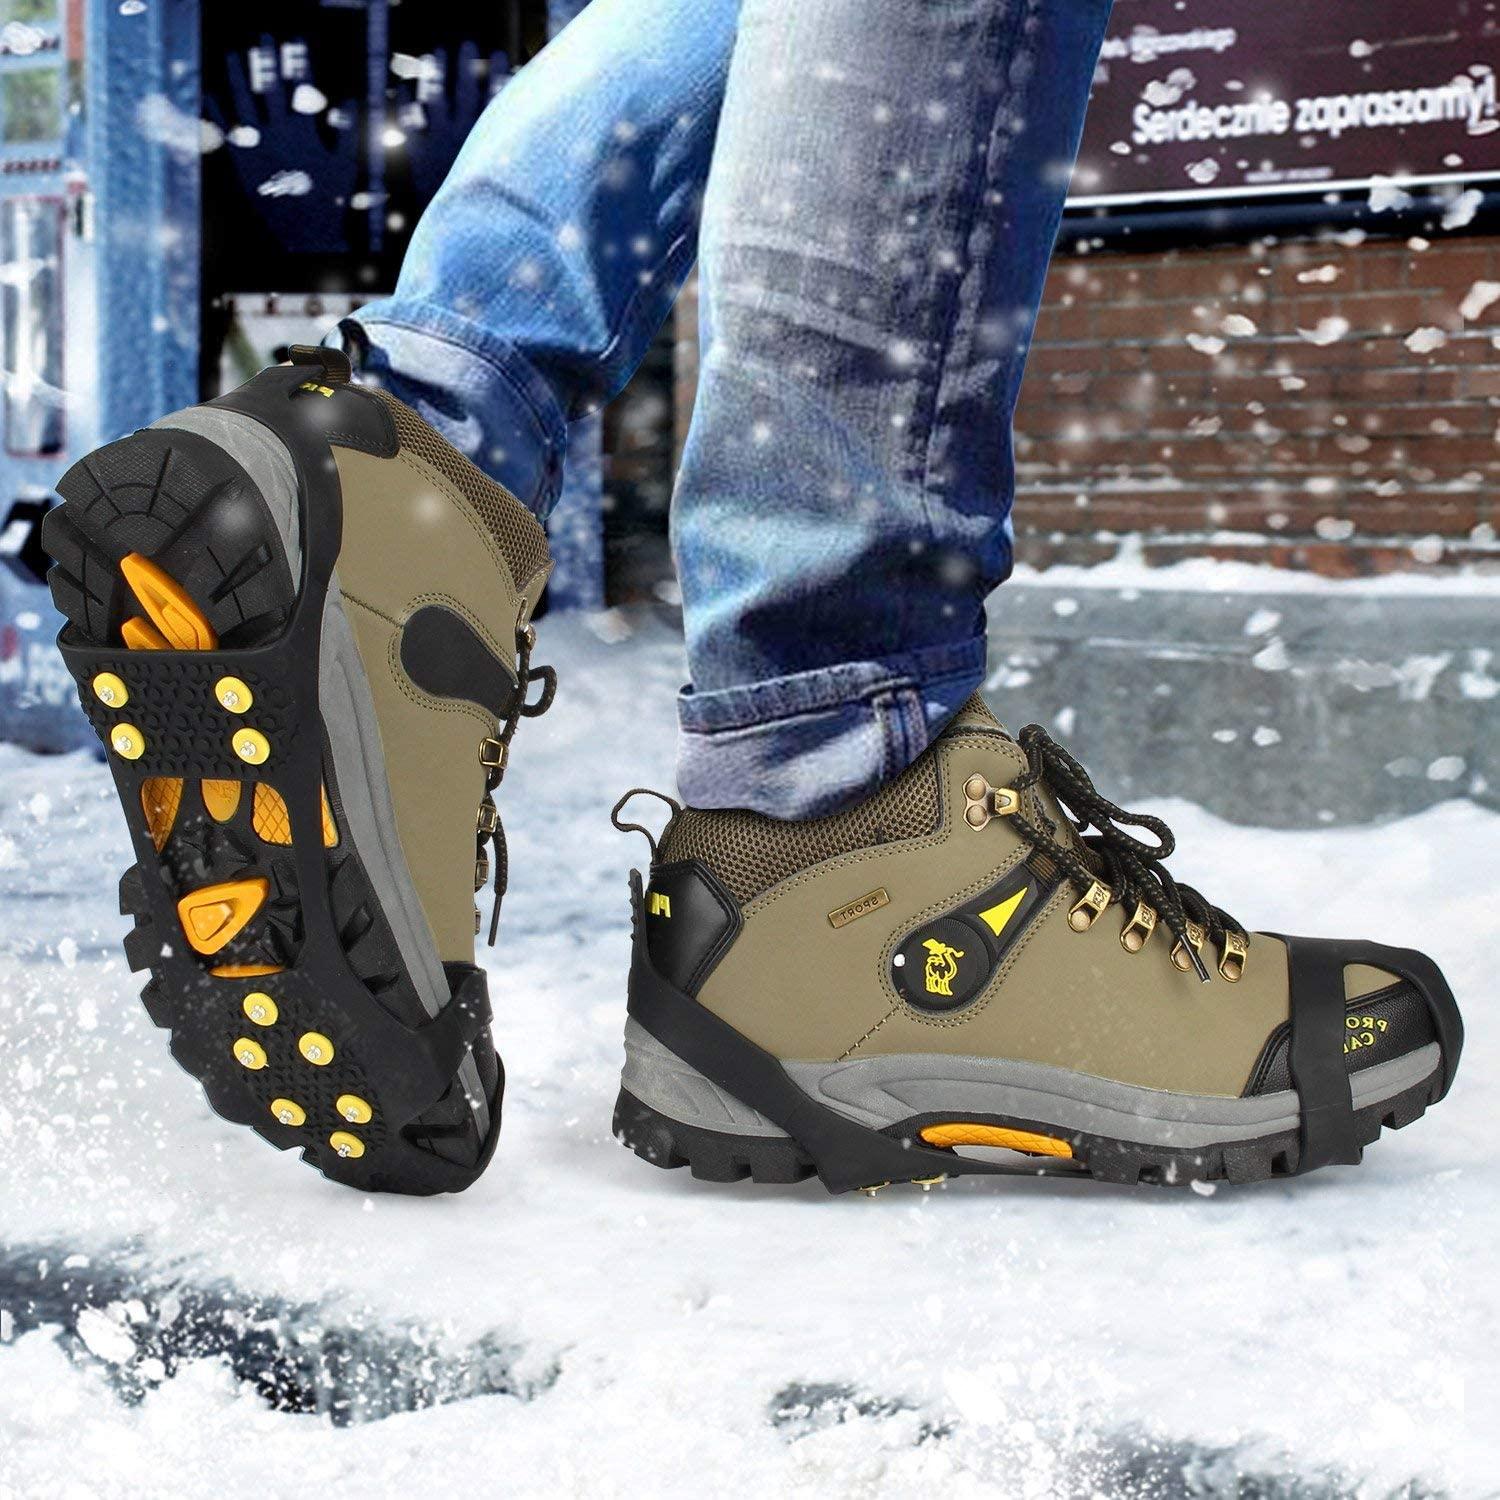 EONPOW Ice Grips, Ice & Snow Grips Cleat Over Shoe/Boot Traction Cleat  Rubber Spikes Anti Slip 10 Steel Studs Crampons Slip-on Stretch Footwear M(WOMEN:7-10/MEN:5-8)  1 Pair